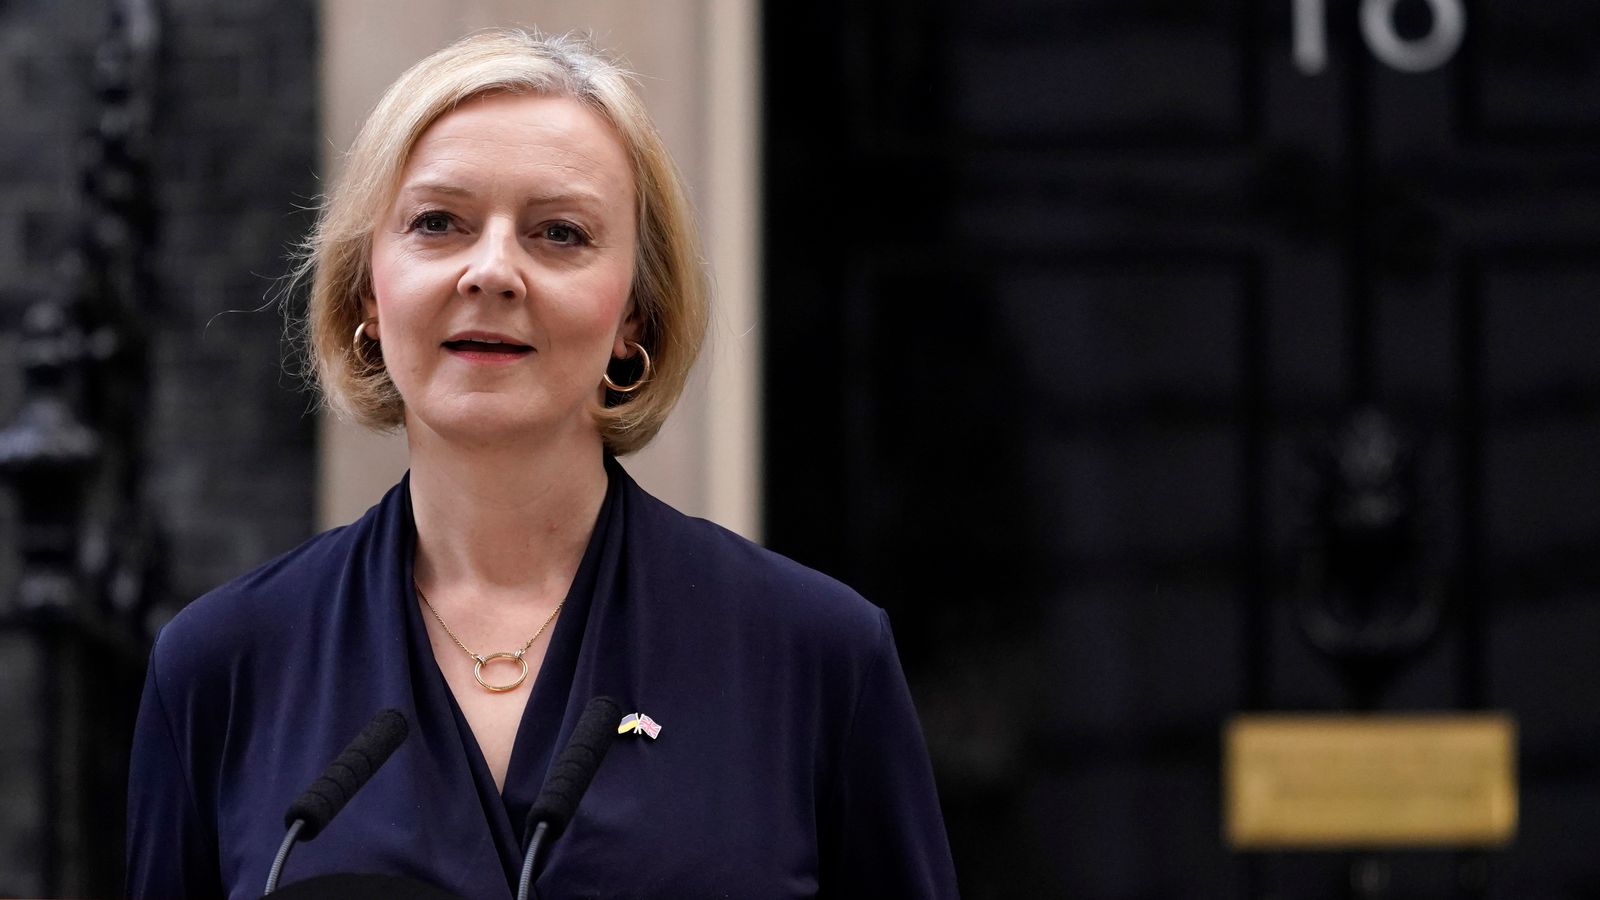 Liz Truss says she 'was not given a realistic chance' as she steps back into the political limelight